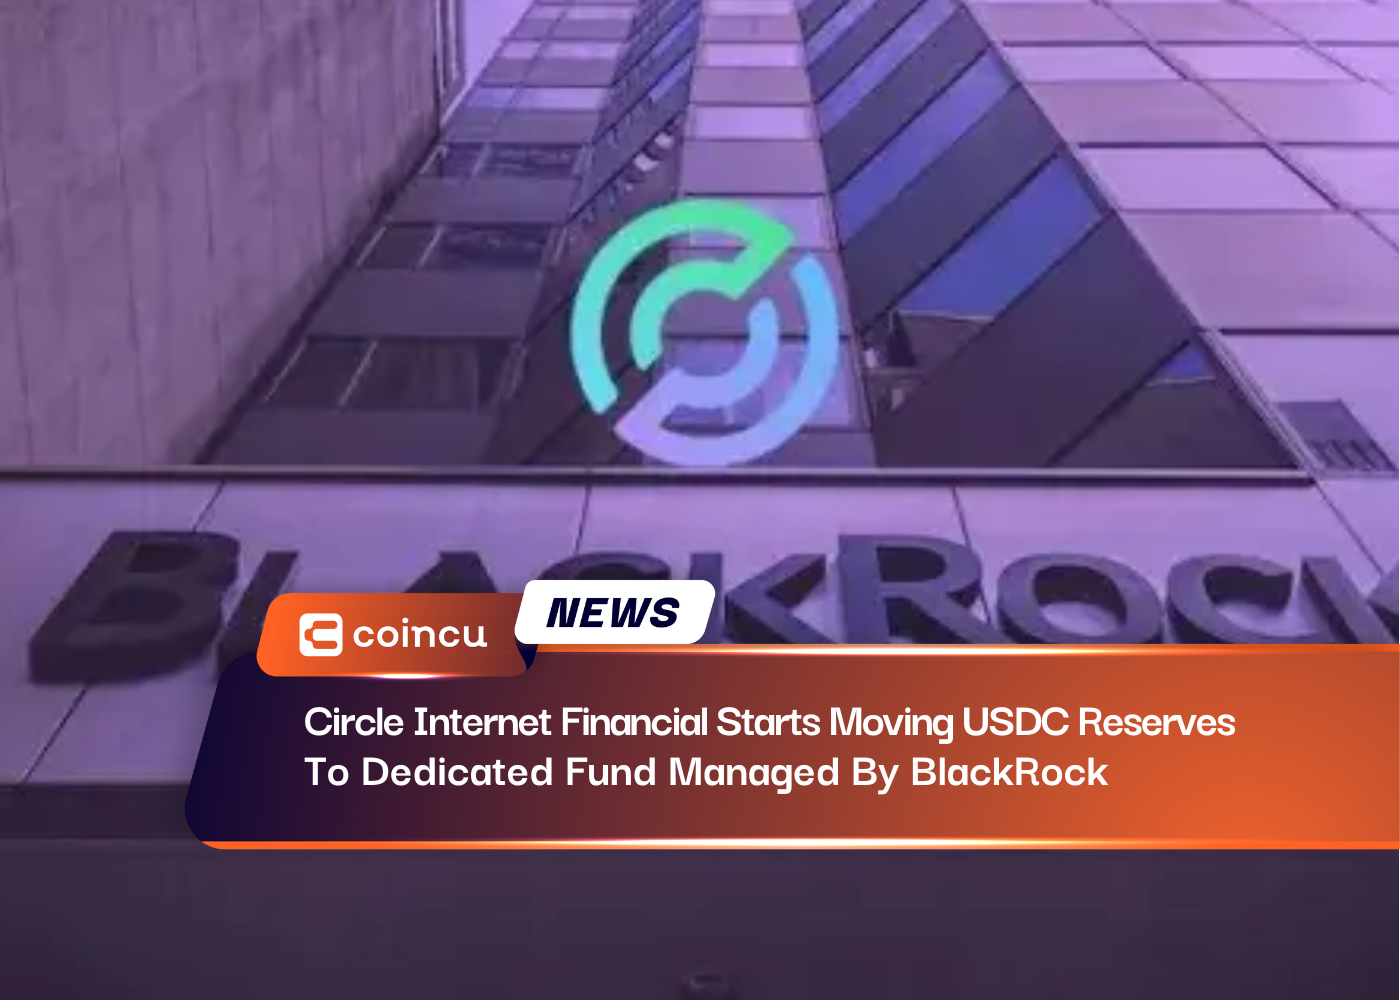 Circle Internet Financial Starts Moving USDC Reserves To Dedicated Fund Managed By BlackRock